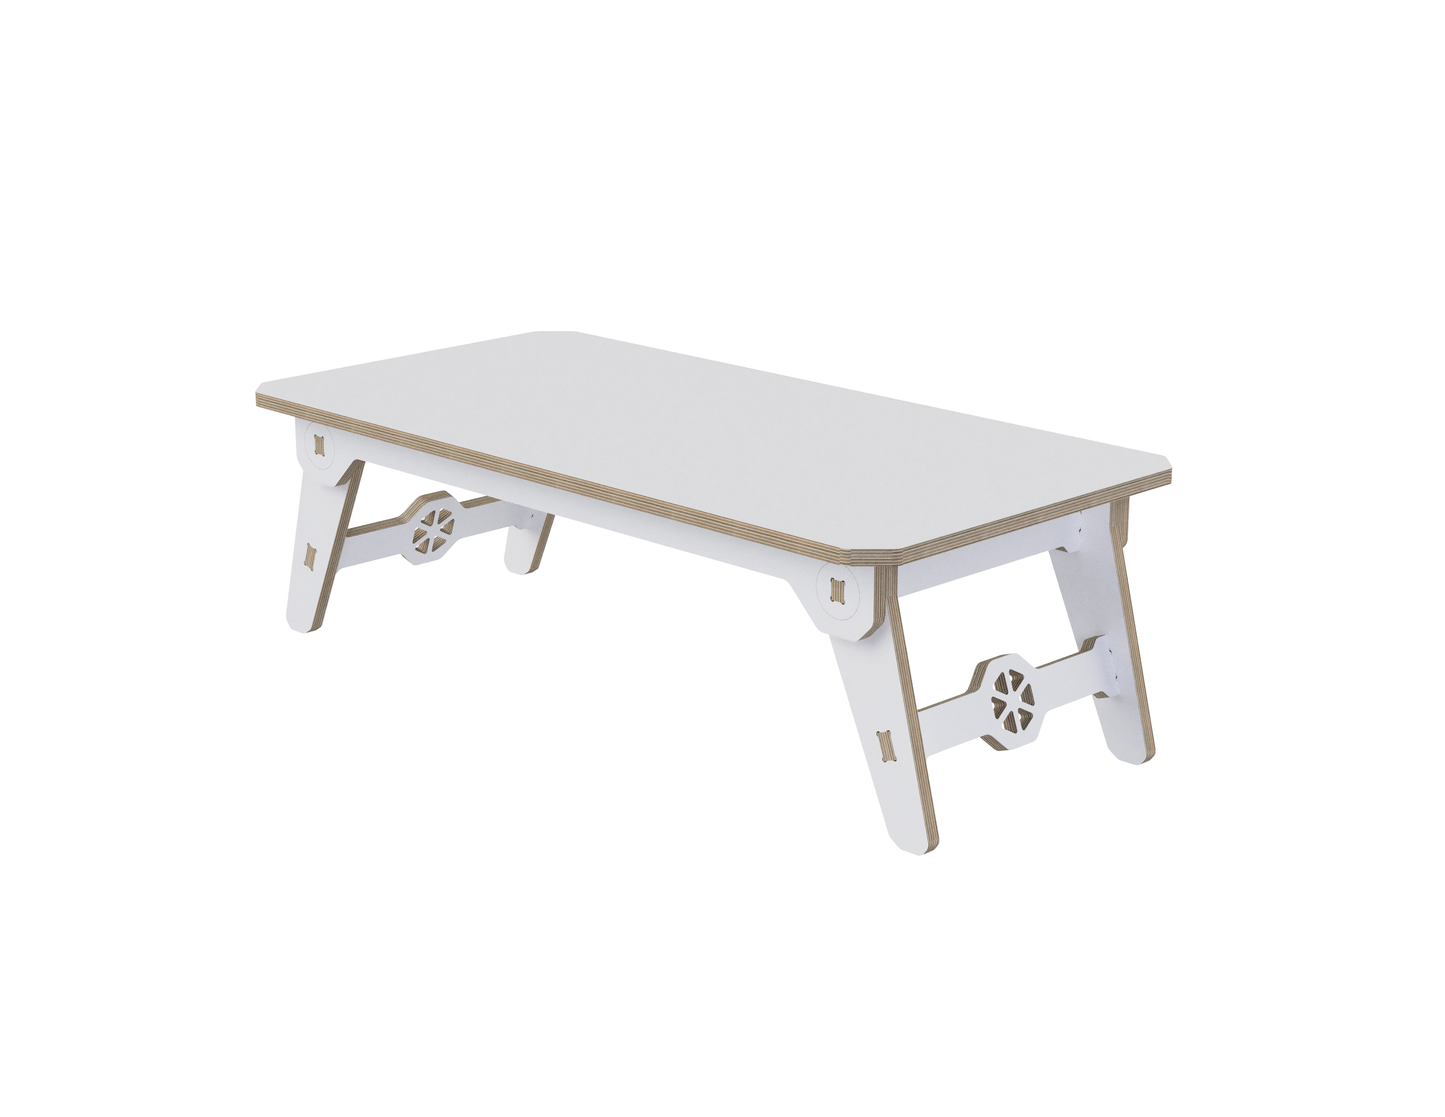 Bed table DXF file